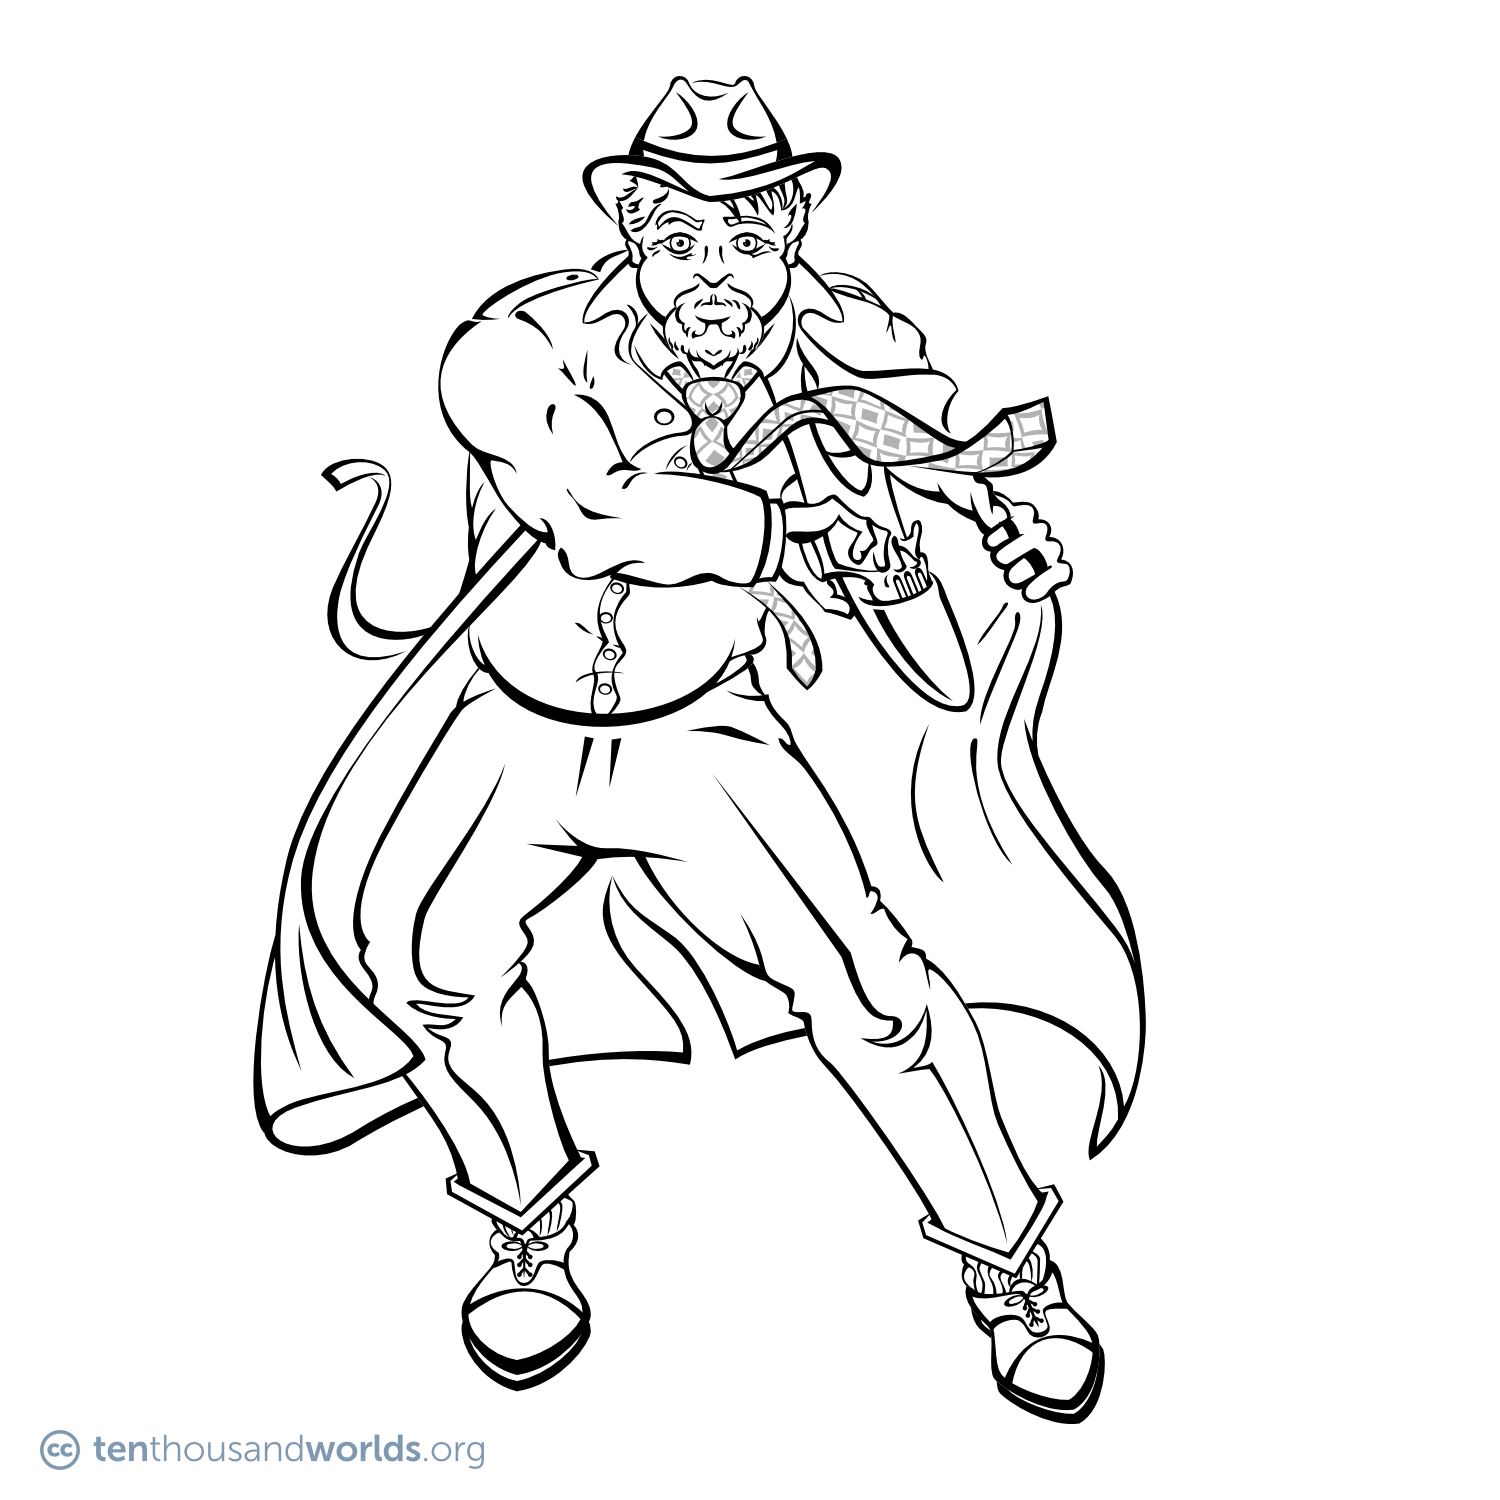 An ink outline of a burly bearded man in a fedora and flapping tie pulls open his coat to withdraw a revolver from its shoulder holster.